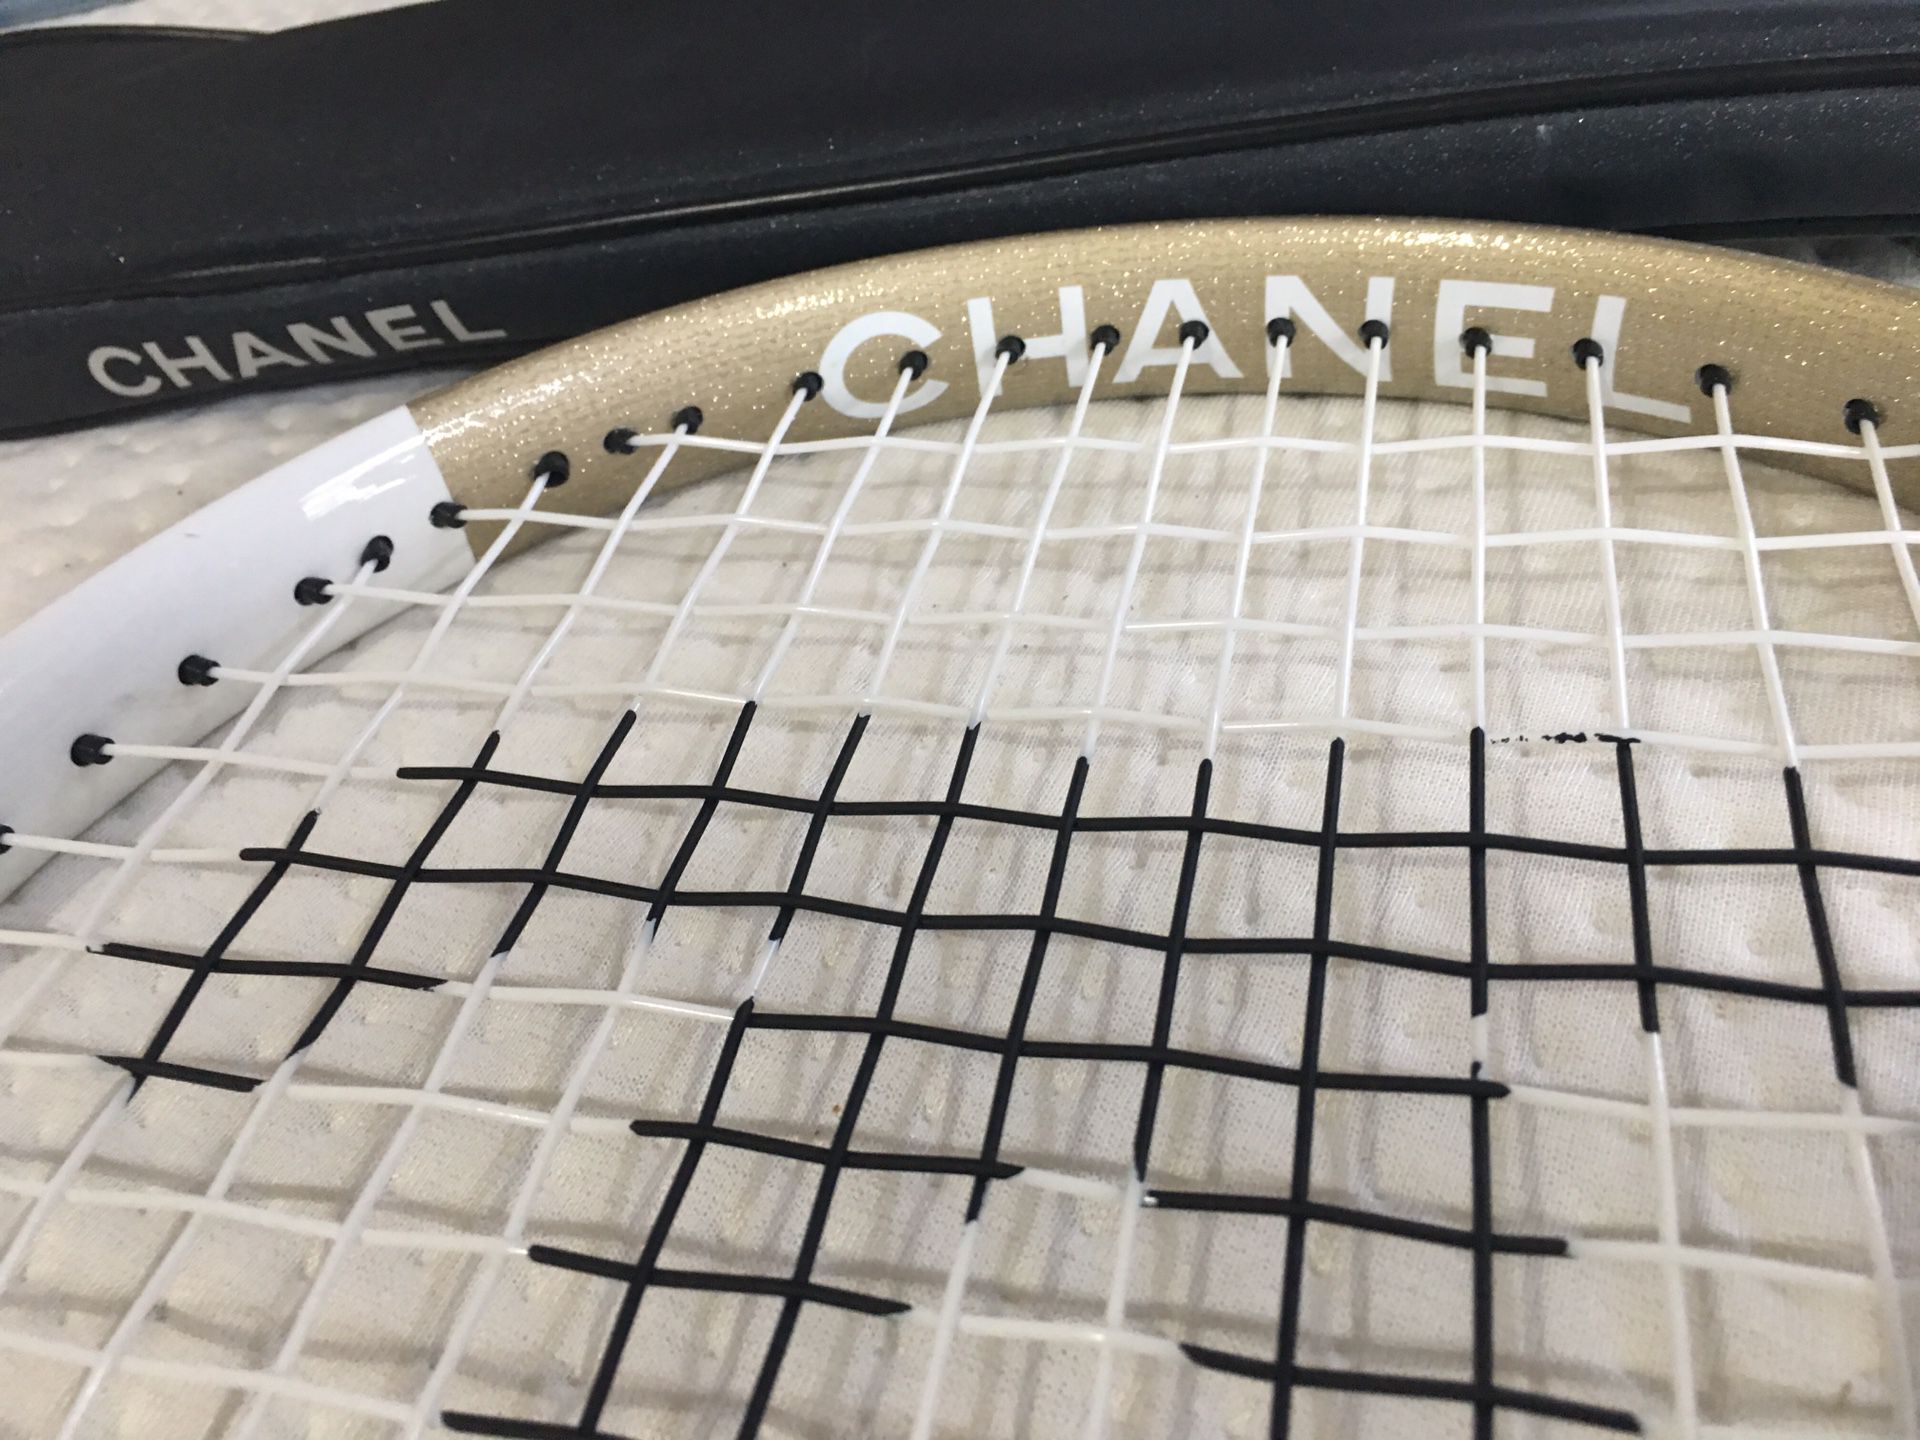 MB Select - The very collectible CHANEL tennis racket is available at  @mb.select ! 🎾✌🏻 👉🏻 Check it now on our online store 🛍 Click on the  picture for more  • • • #